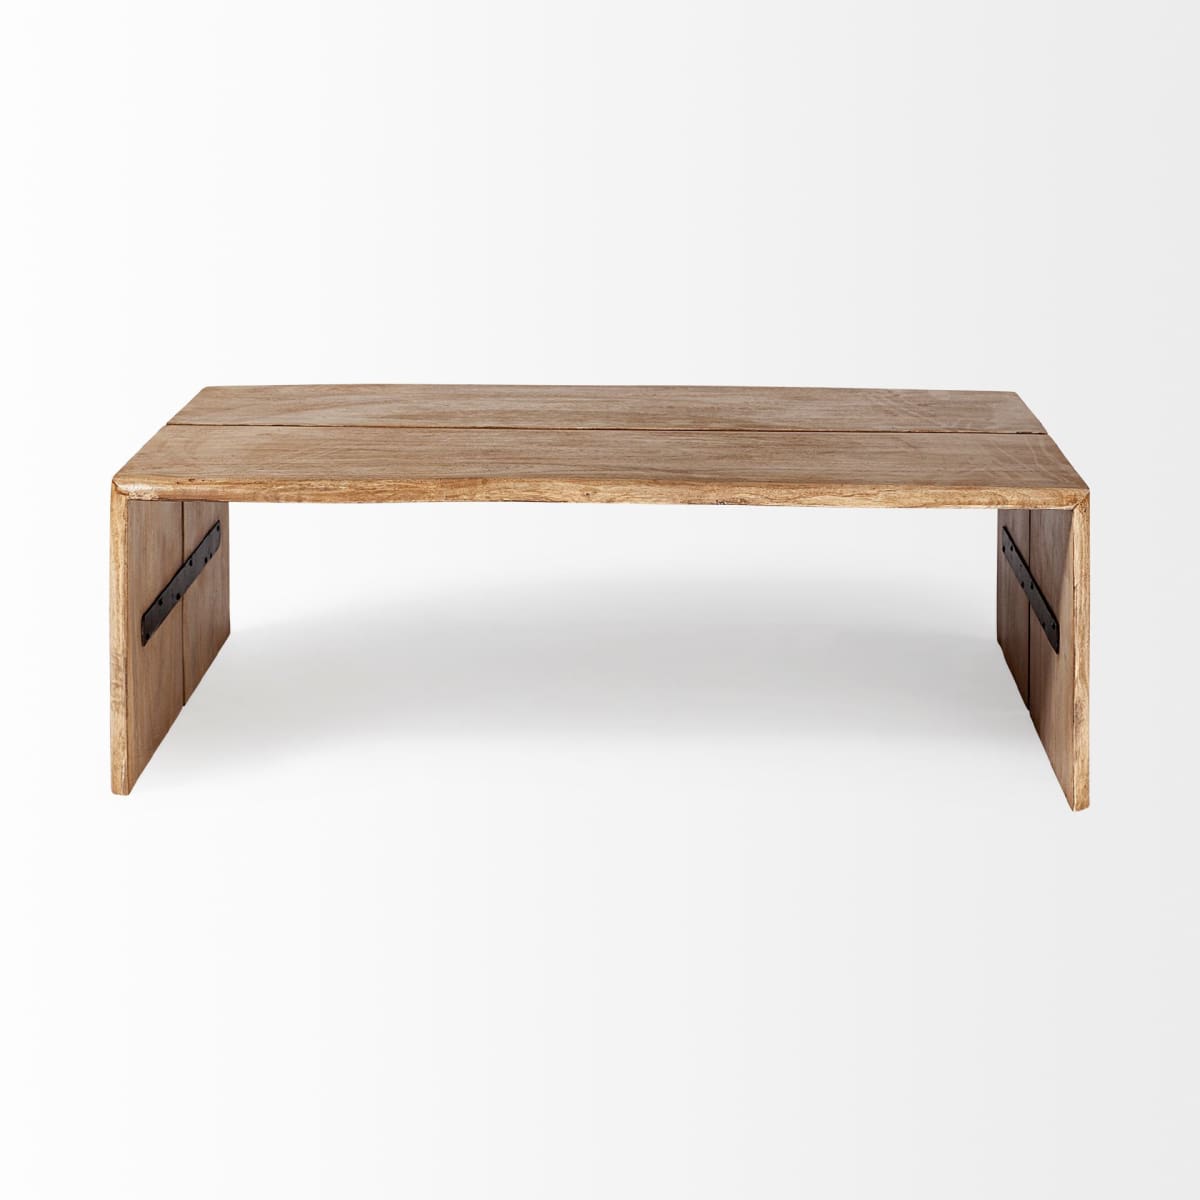 San Andreas Coffee Table Brown Wood - coffee-tables